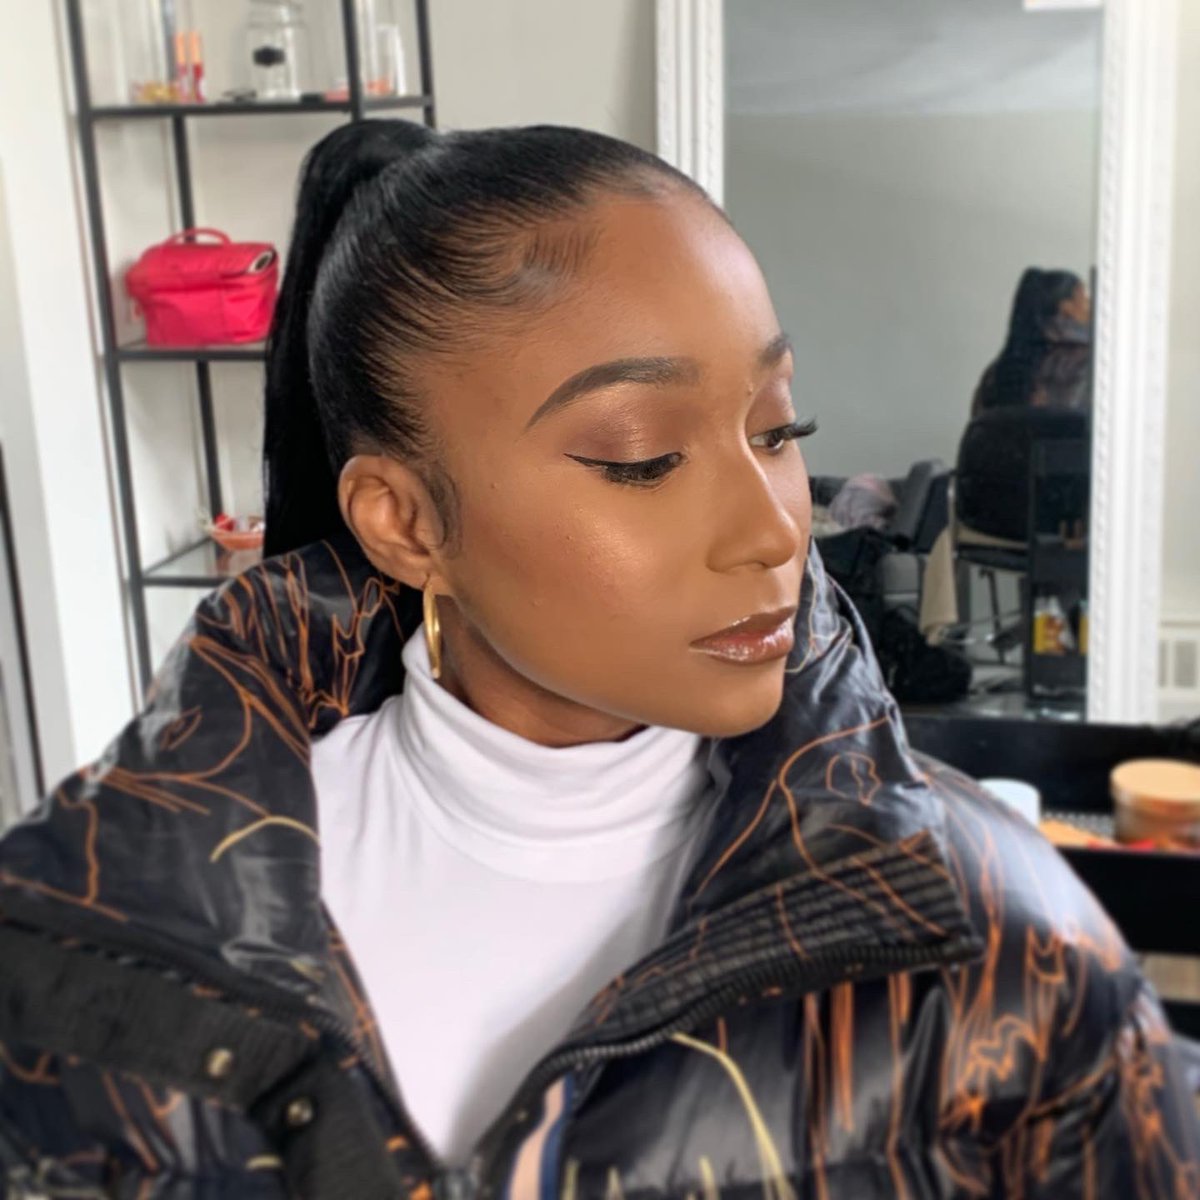 This morning’s Soft Glam with this beauty